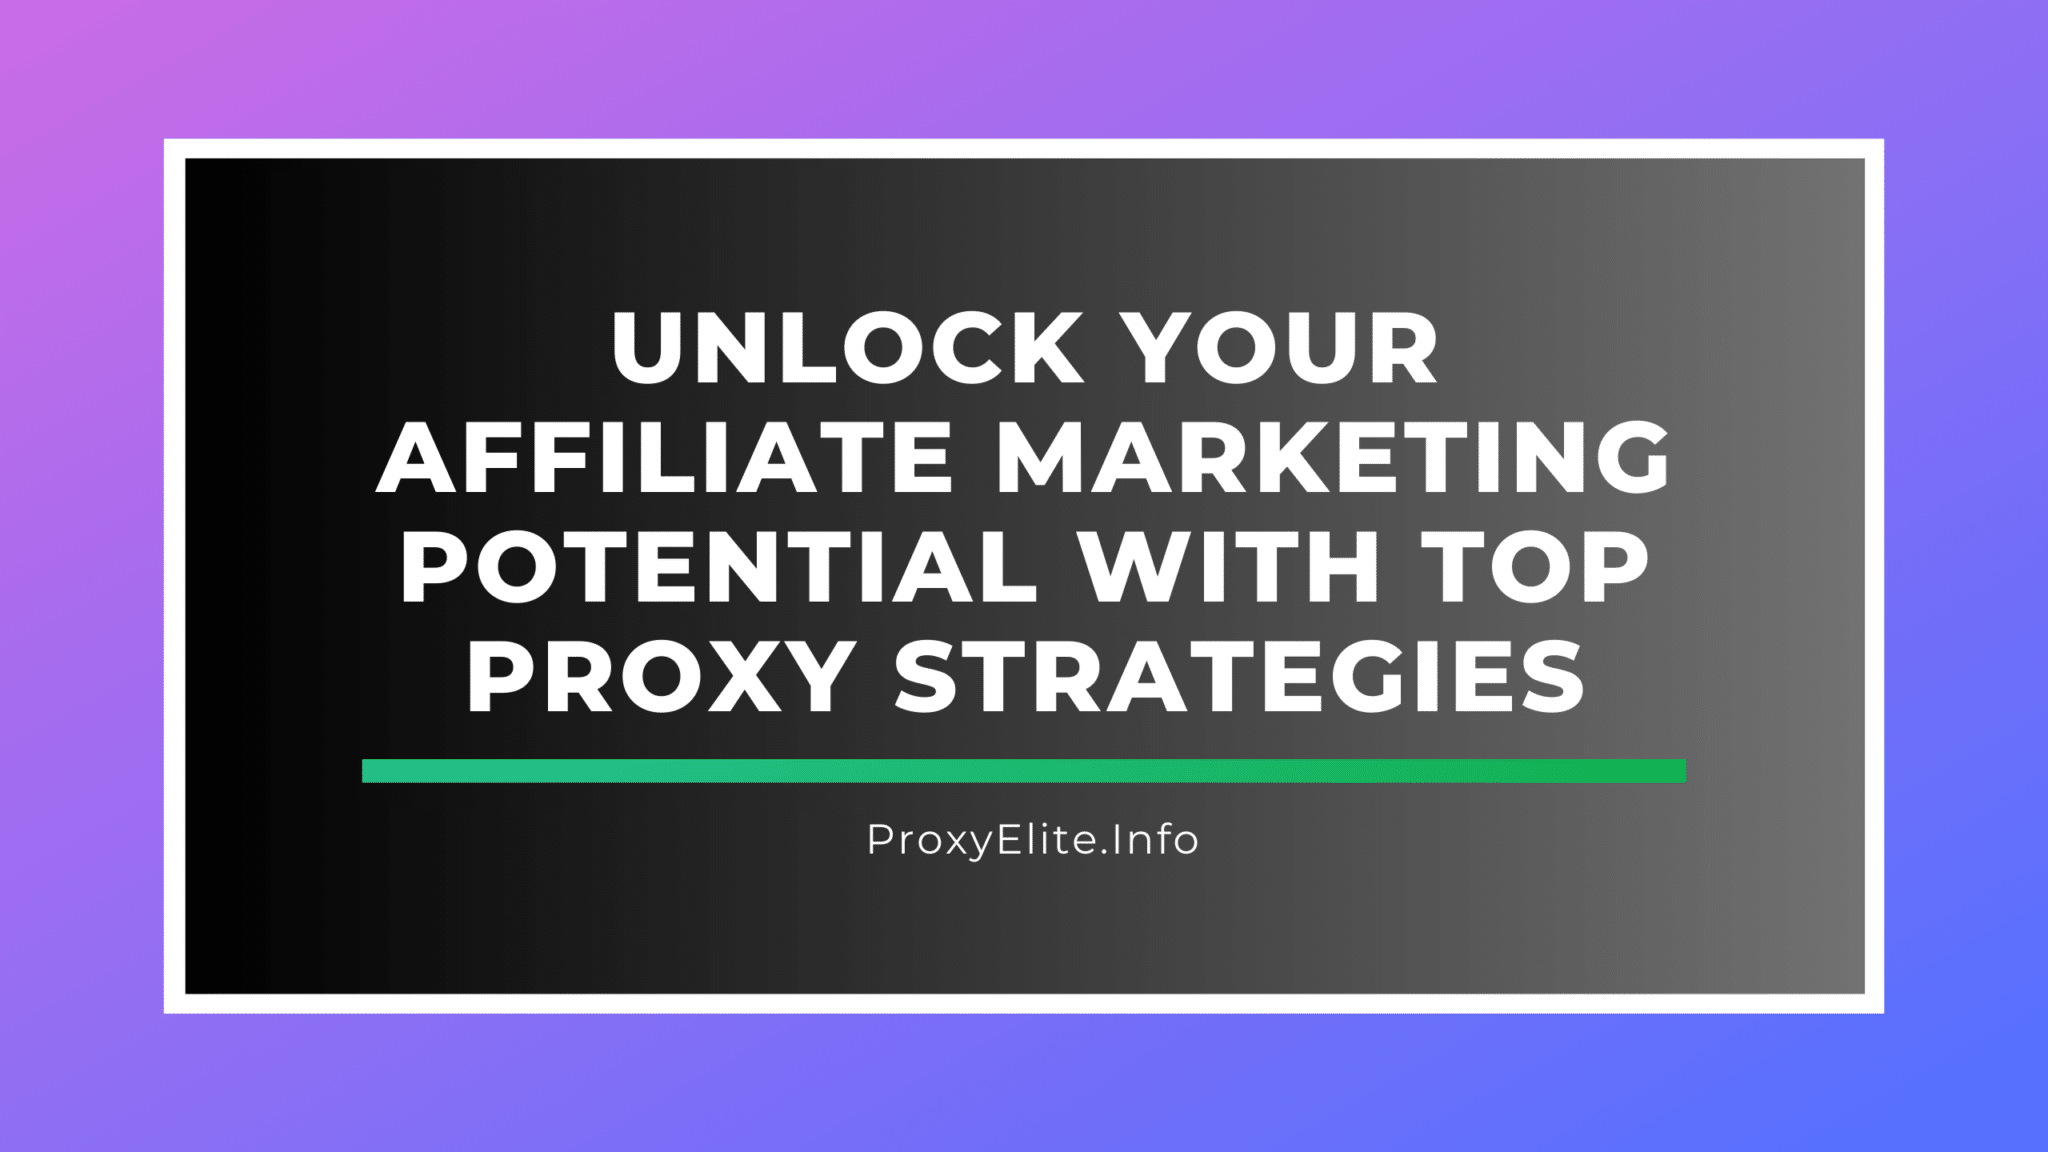 Unlock Your Affiliate Marketing Potential with Top Proxy Strategies